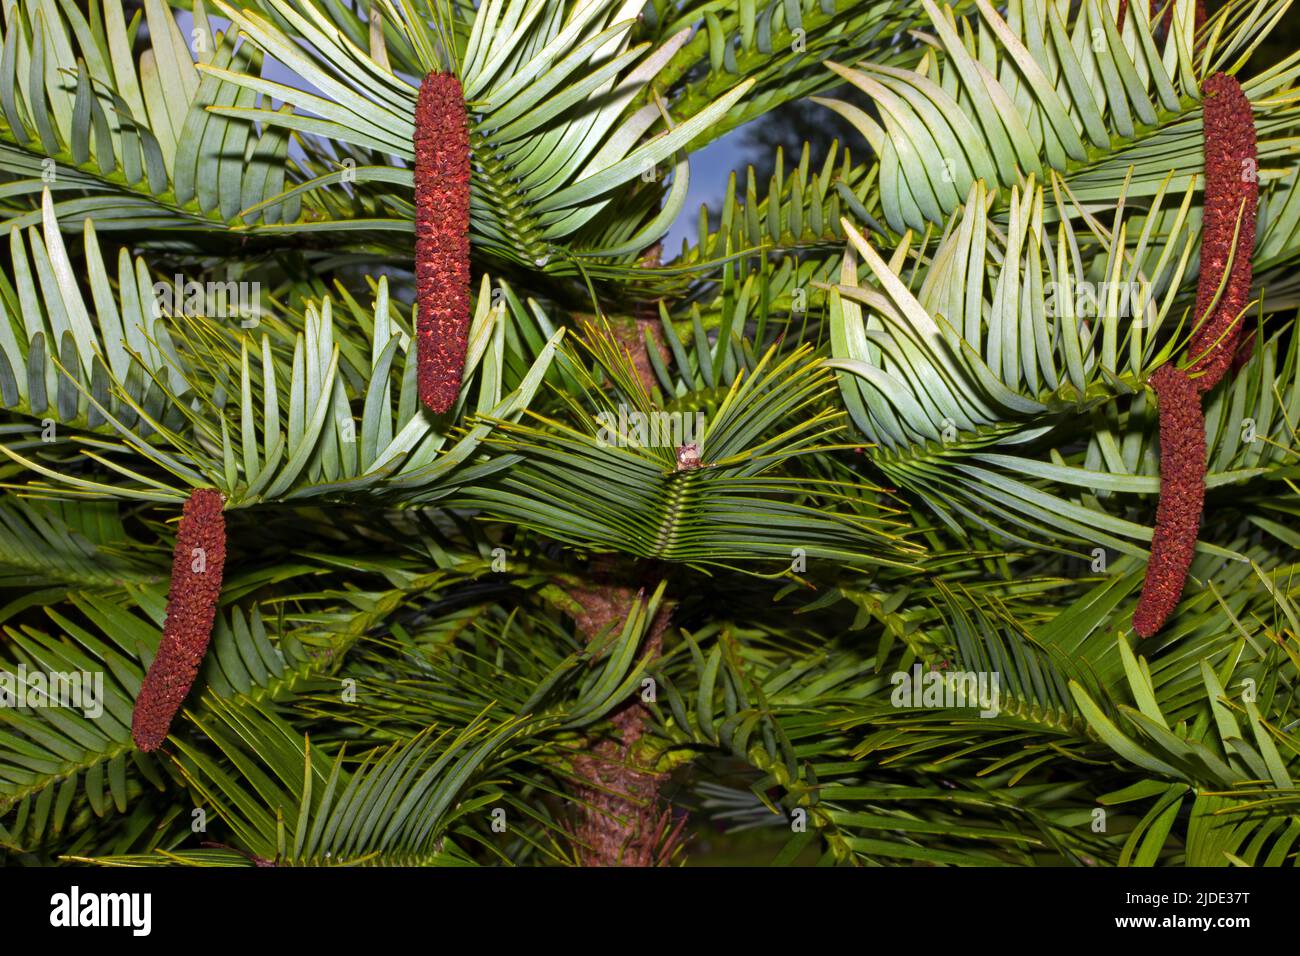 Wollemia nobilis (Wollemi pine) was known only from fossils until a living plant was discovered in the temperate rainforests of Australia. Stock Photo